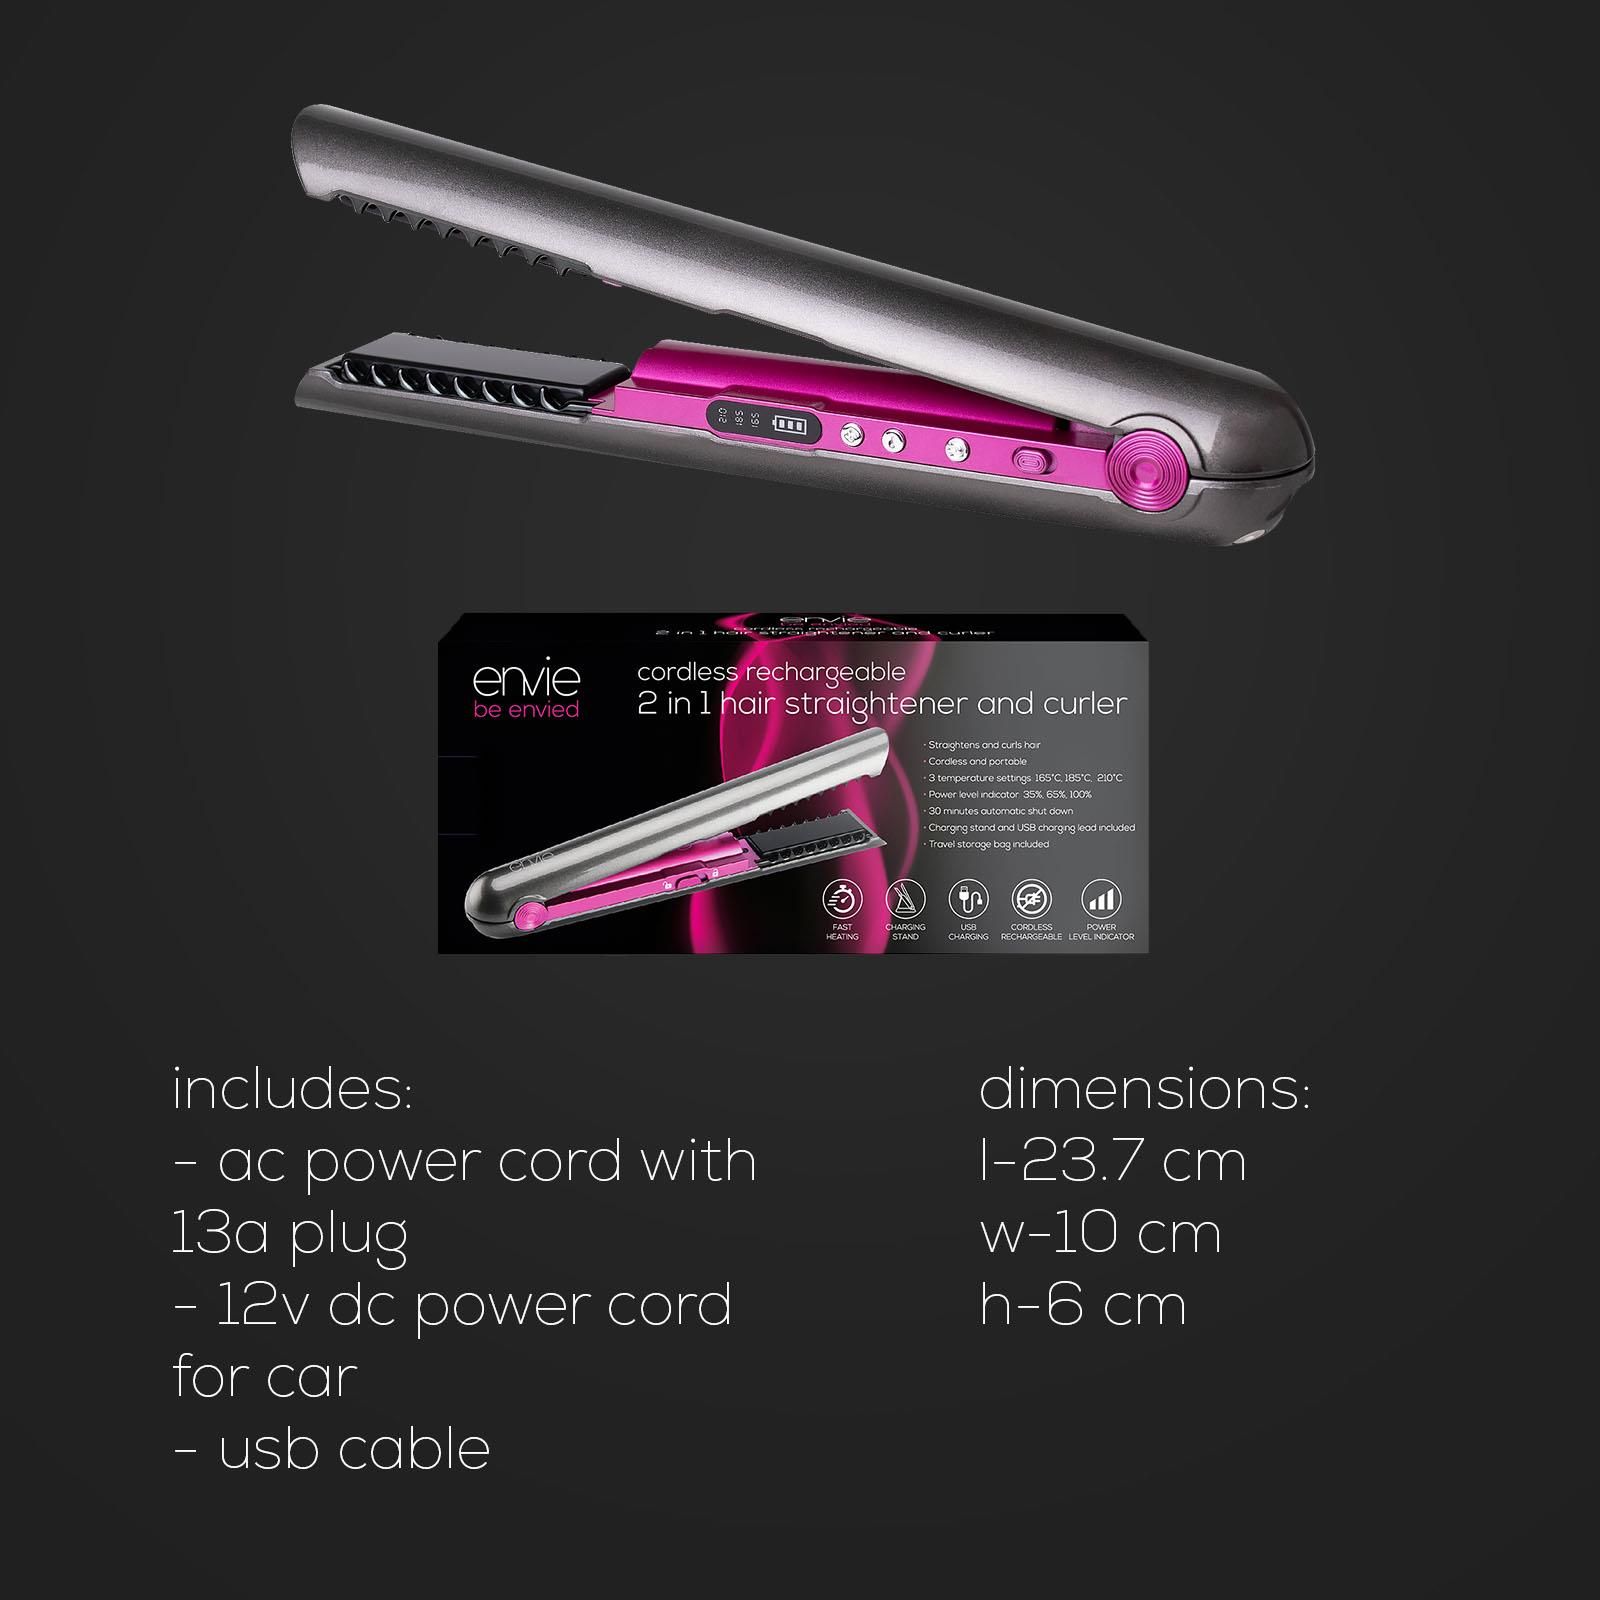 Your curling iron and flat iron in one handy tool, the envie cordless rechargeable 2 in 1 hair straightener works effortlessly on fine, thick, long, medium and short hair.  The ceramic coated plate with its floating heating plate ensures you never pull on your hair, reducing heat damage and locking in the moisture, creating a shiny, healthy finish with every style.

Key Features:
2 in 1 Hair Straightener and Curler
Rapid Heating
3 Temperature Settings: 165°C, 185°C, 210°C
Power Level Indicator: 35%, 65%, 100%
Ceramic Coated Plate
Floating Heating Plate
Lockable Handle
30 Minutes Automatic Shutdown
Charging Time: 2.5 Hours
Useage Time: 30 minutes @ 210°C  
Charging Stand and USB Charging Lead included
Travel Storage Bag included